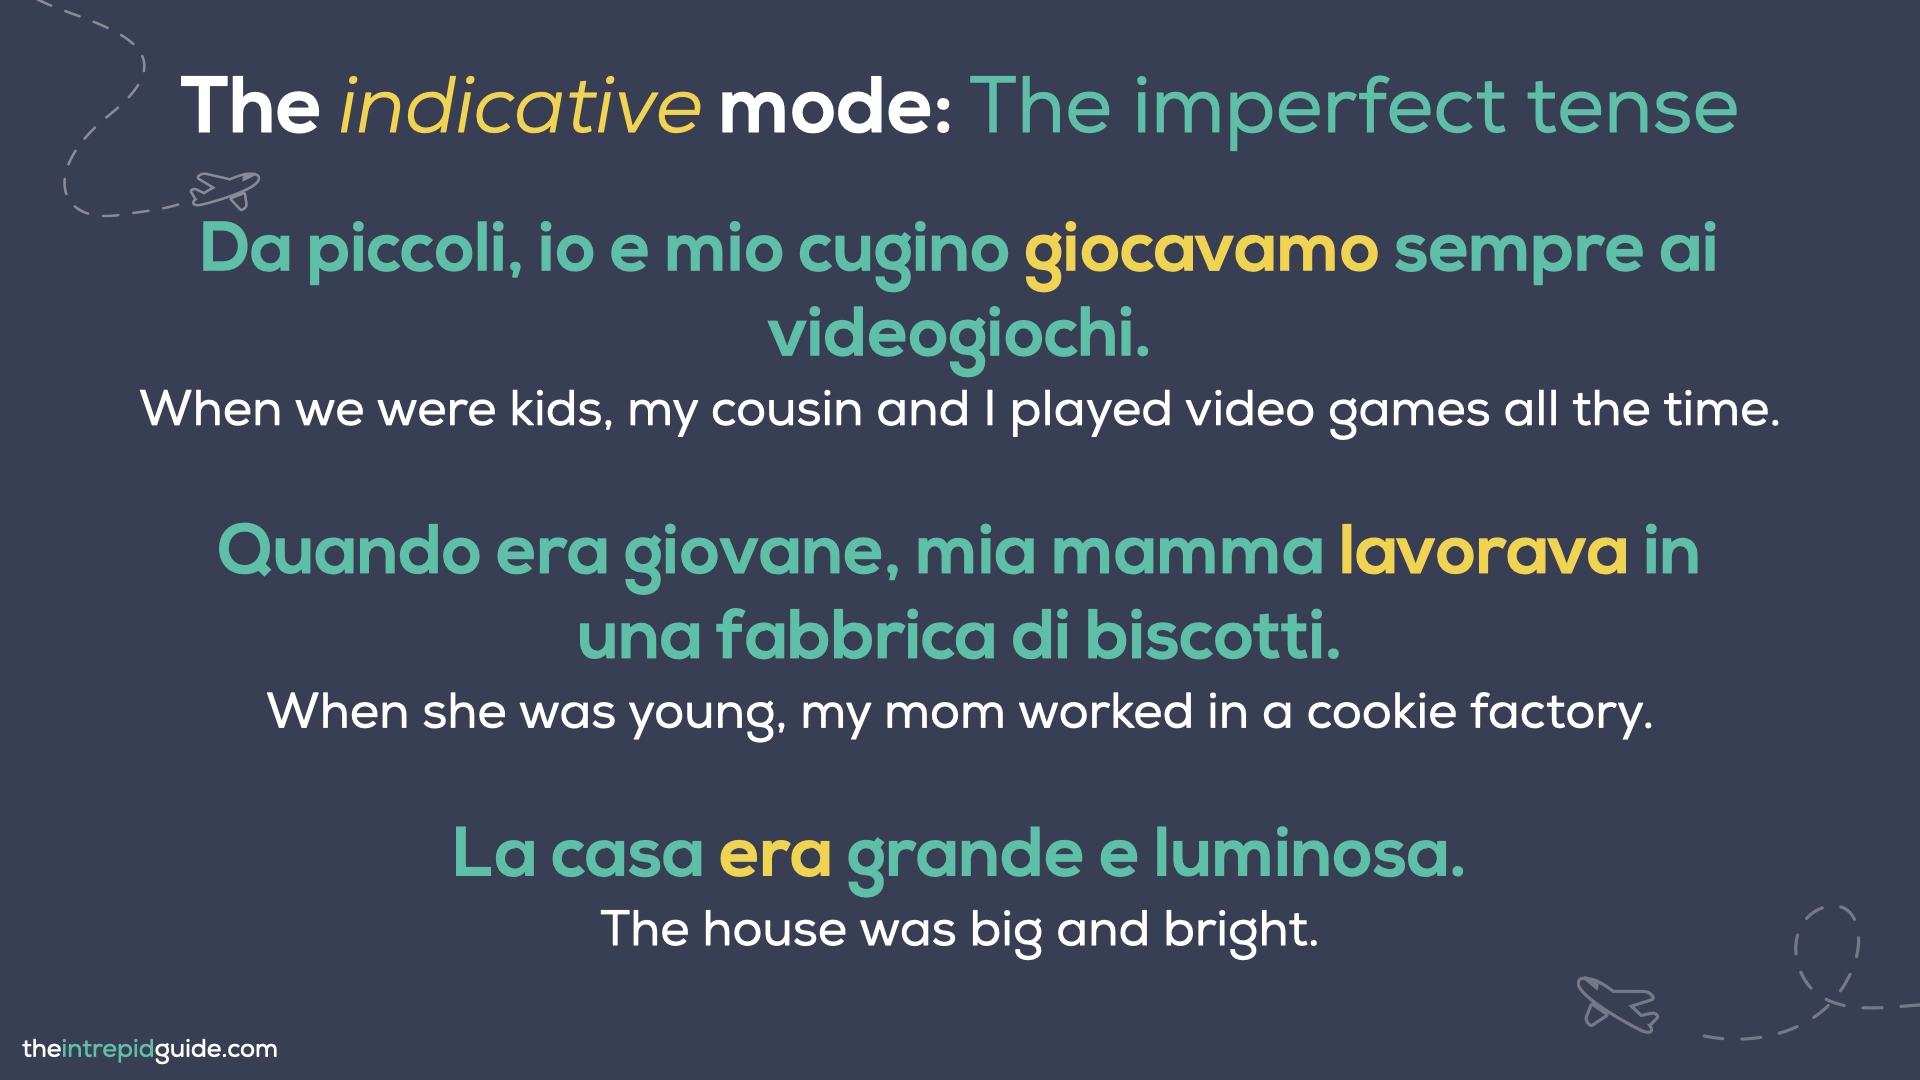 Italian tenses - The Indicative Mode - The Imperfect Tense